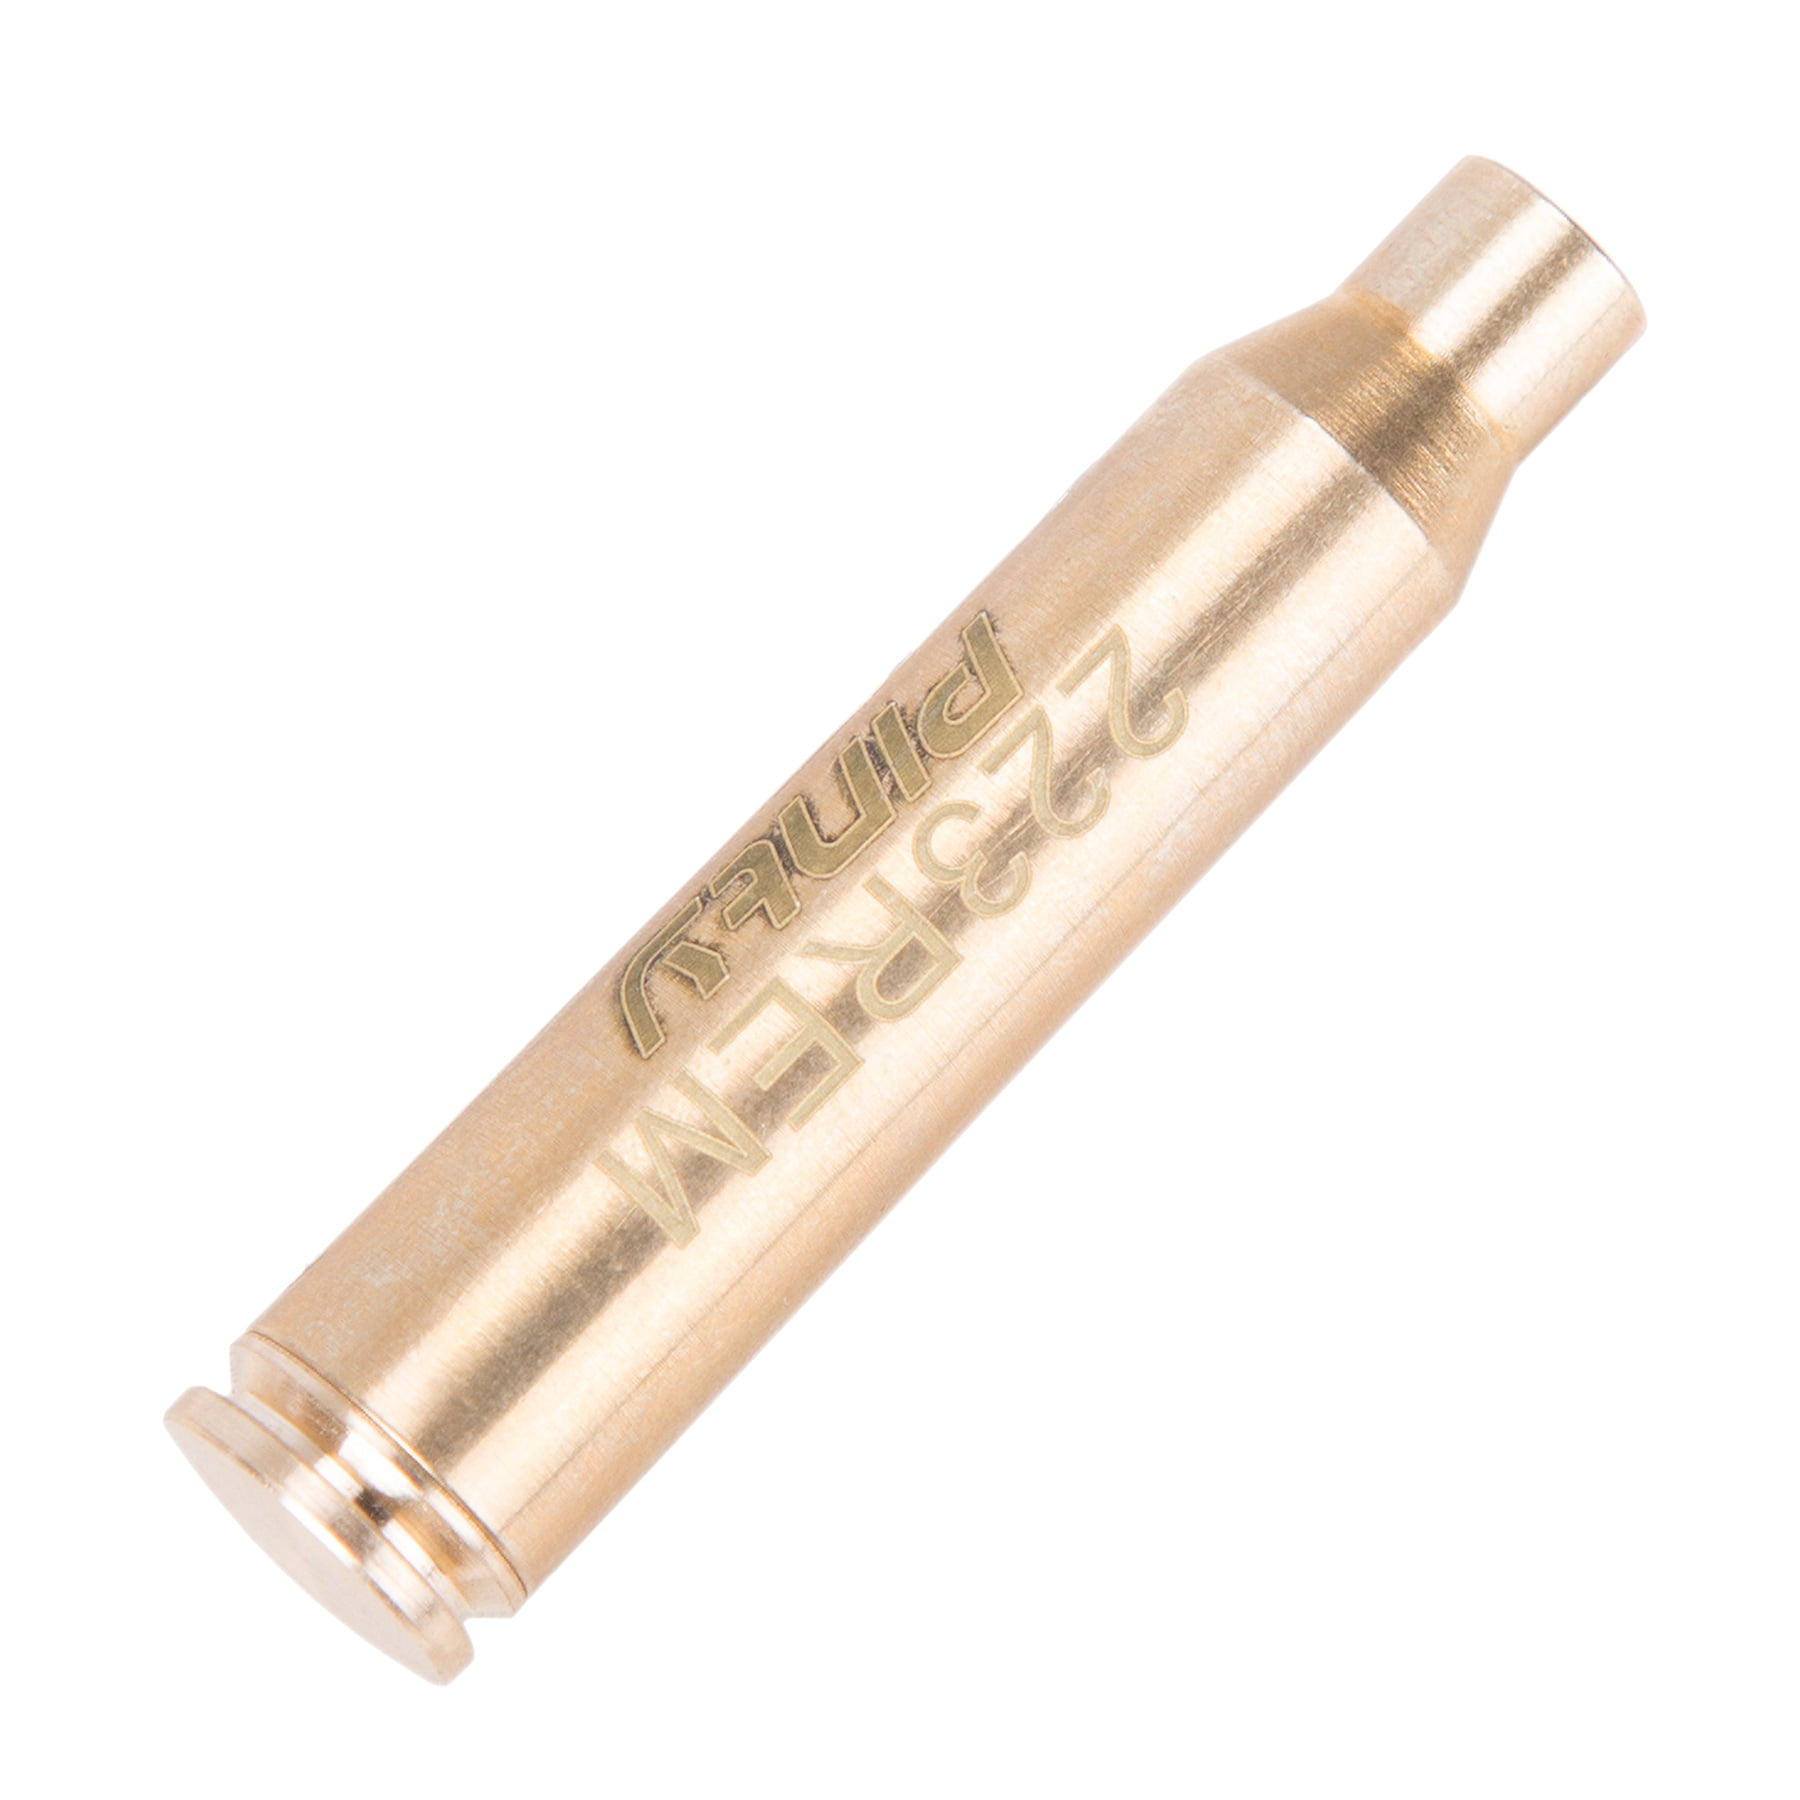 Details about   .223REM Laser Bore Sighter Red Dot Brass Cartridge Boresight For Rifle Gun Scope 